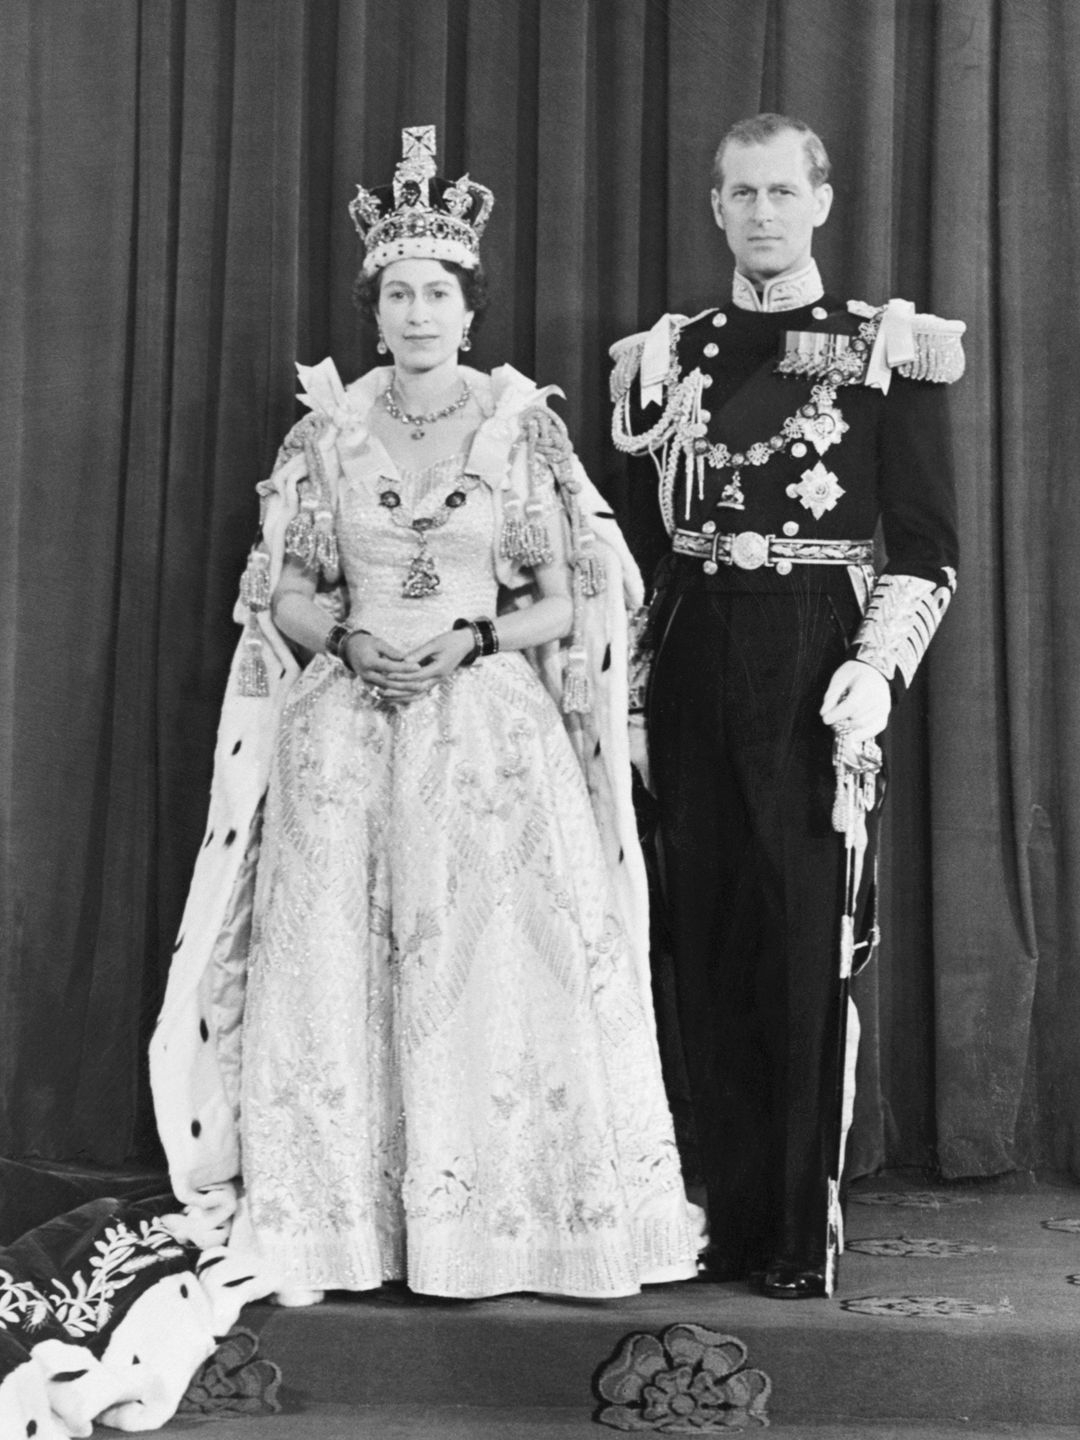 The Queen wearing her Coronation gown, the Imperial State Crown and regal robes